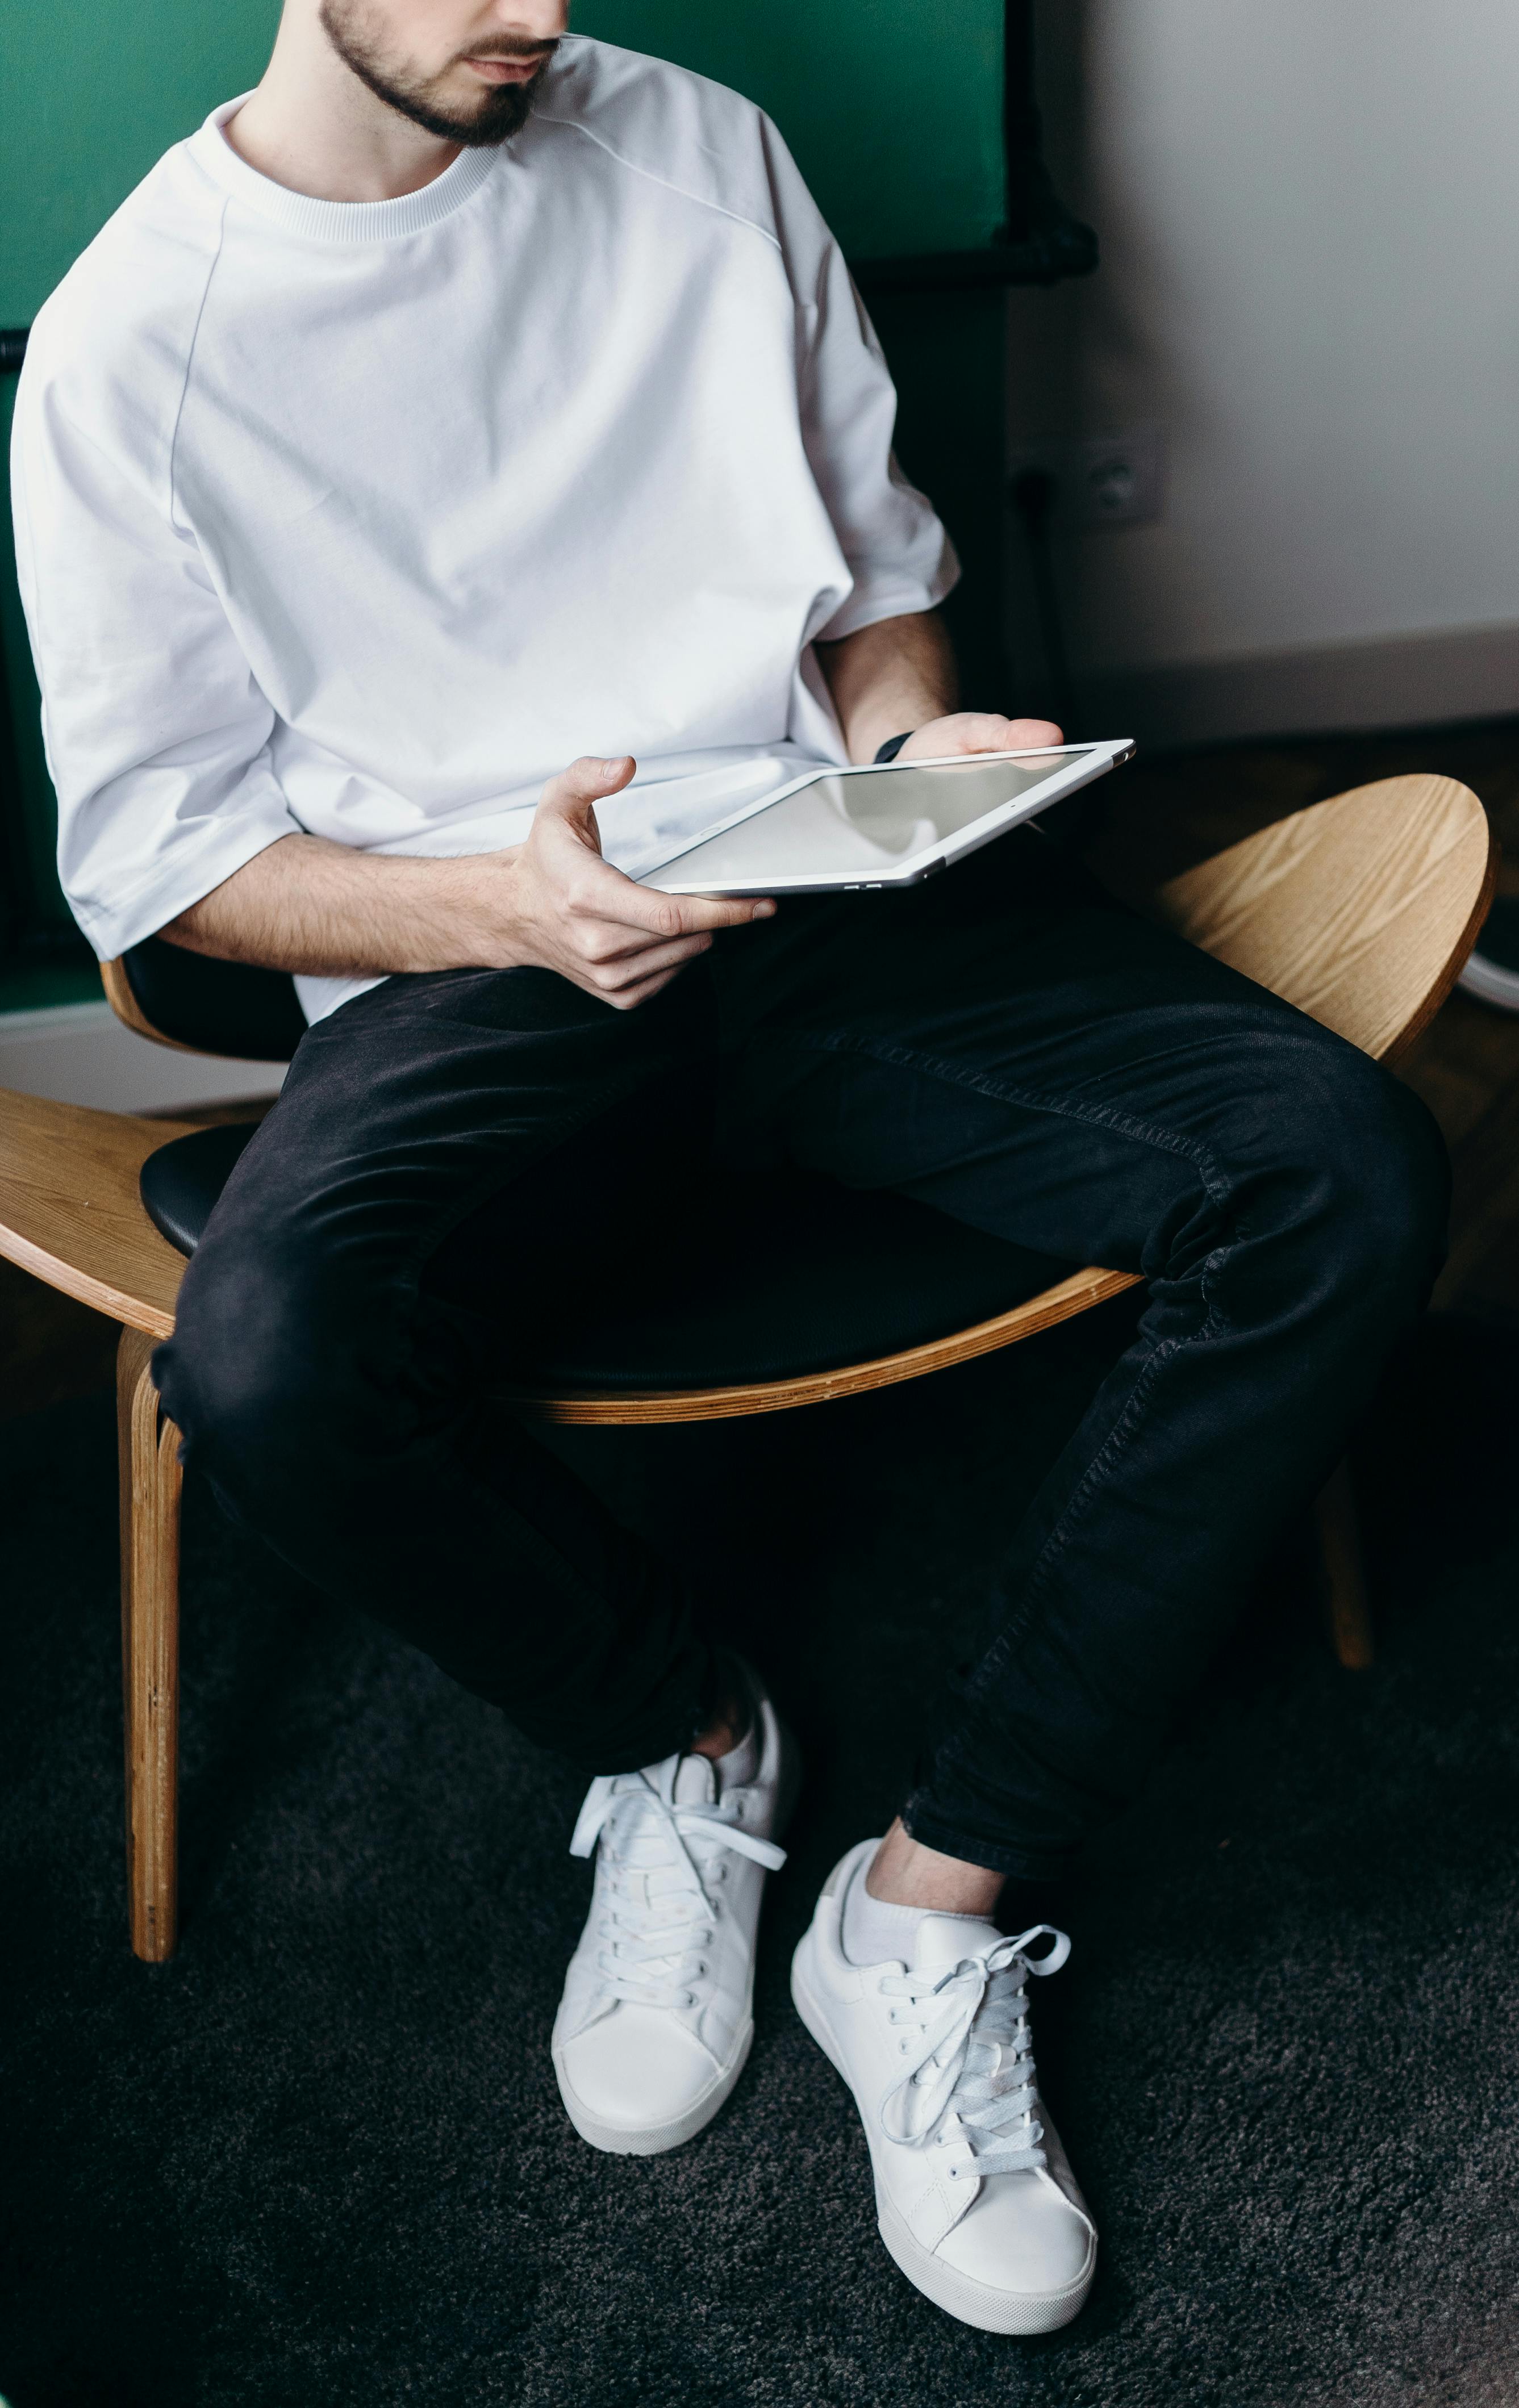 man in white shirt and black pants sitting on brown wooden chair